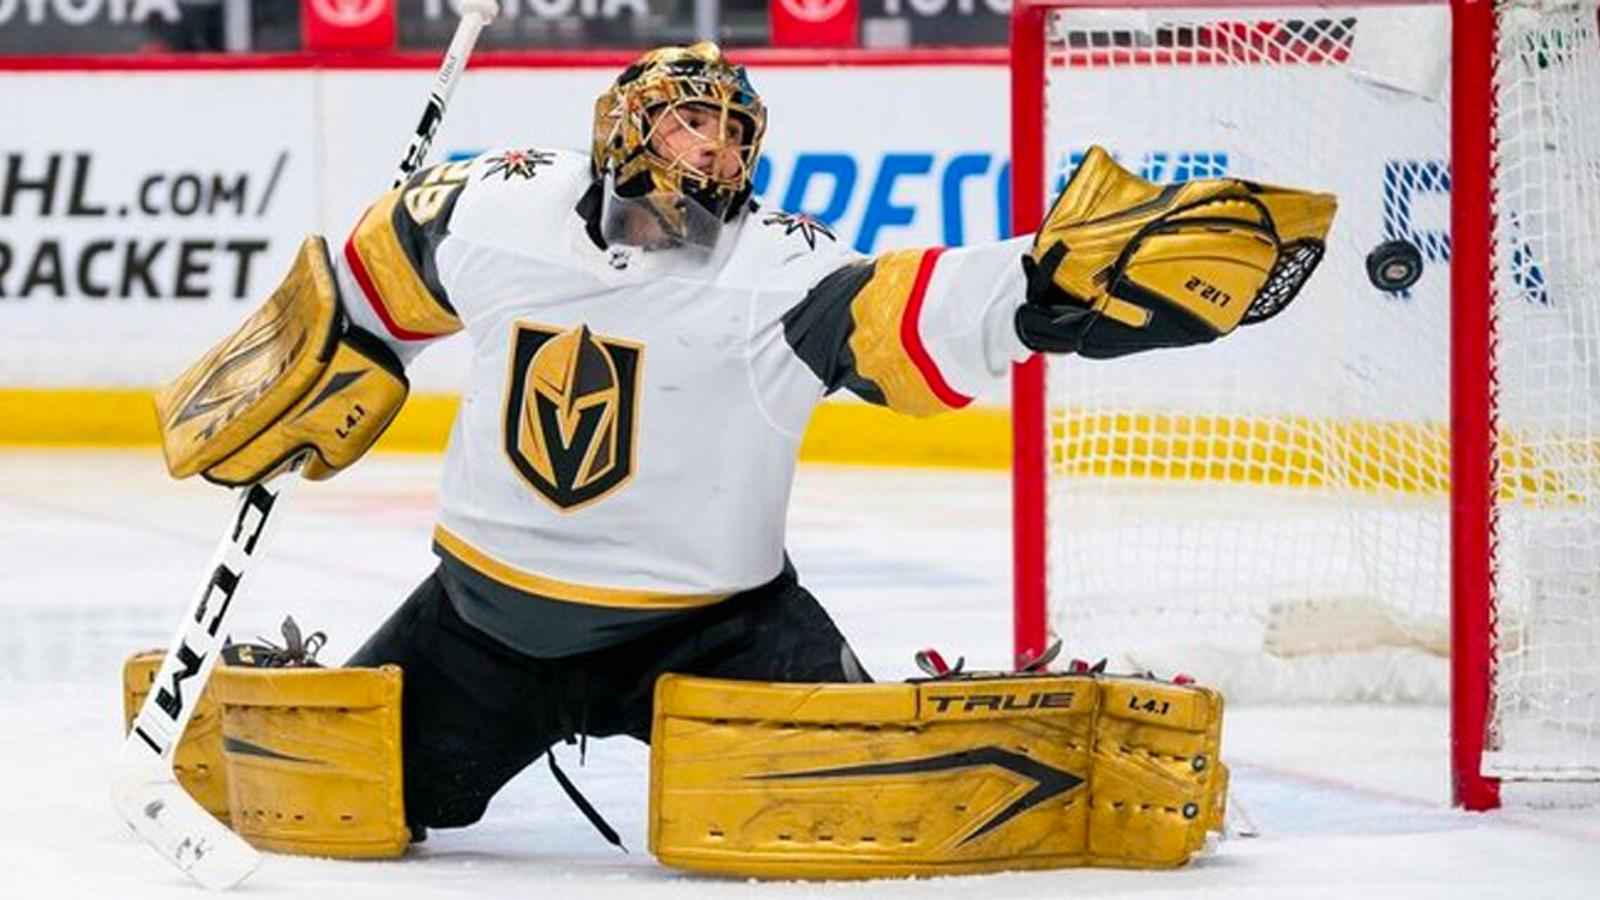 Report: Fleury back in trade talks, but this time to a new team